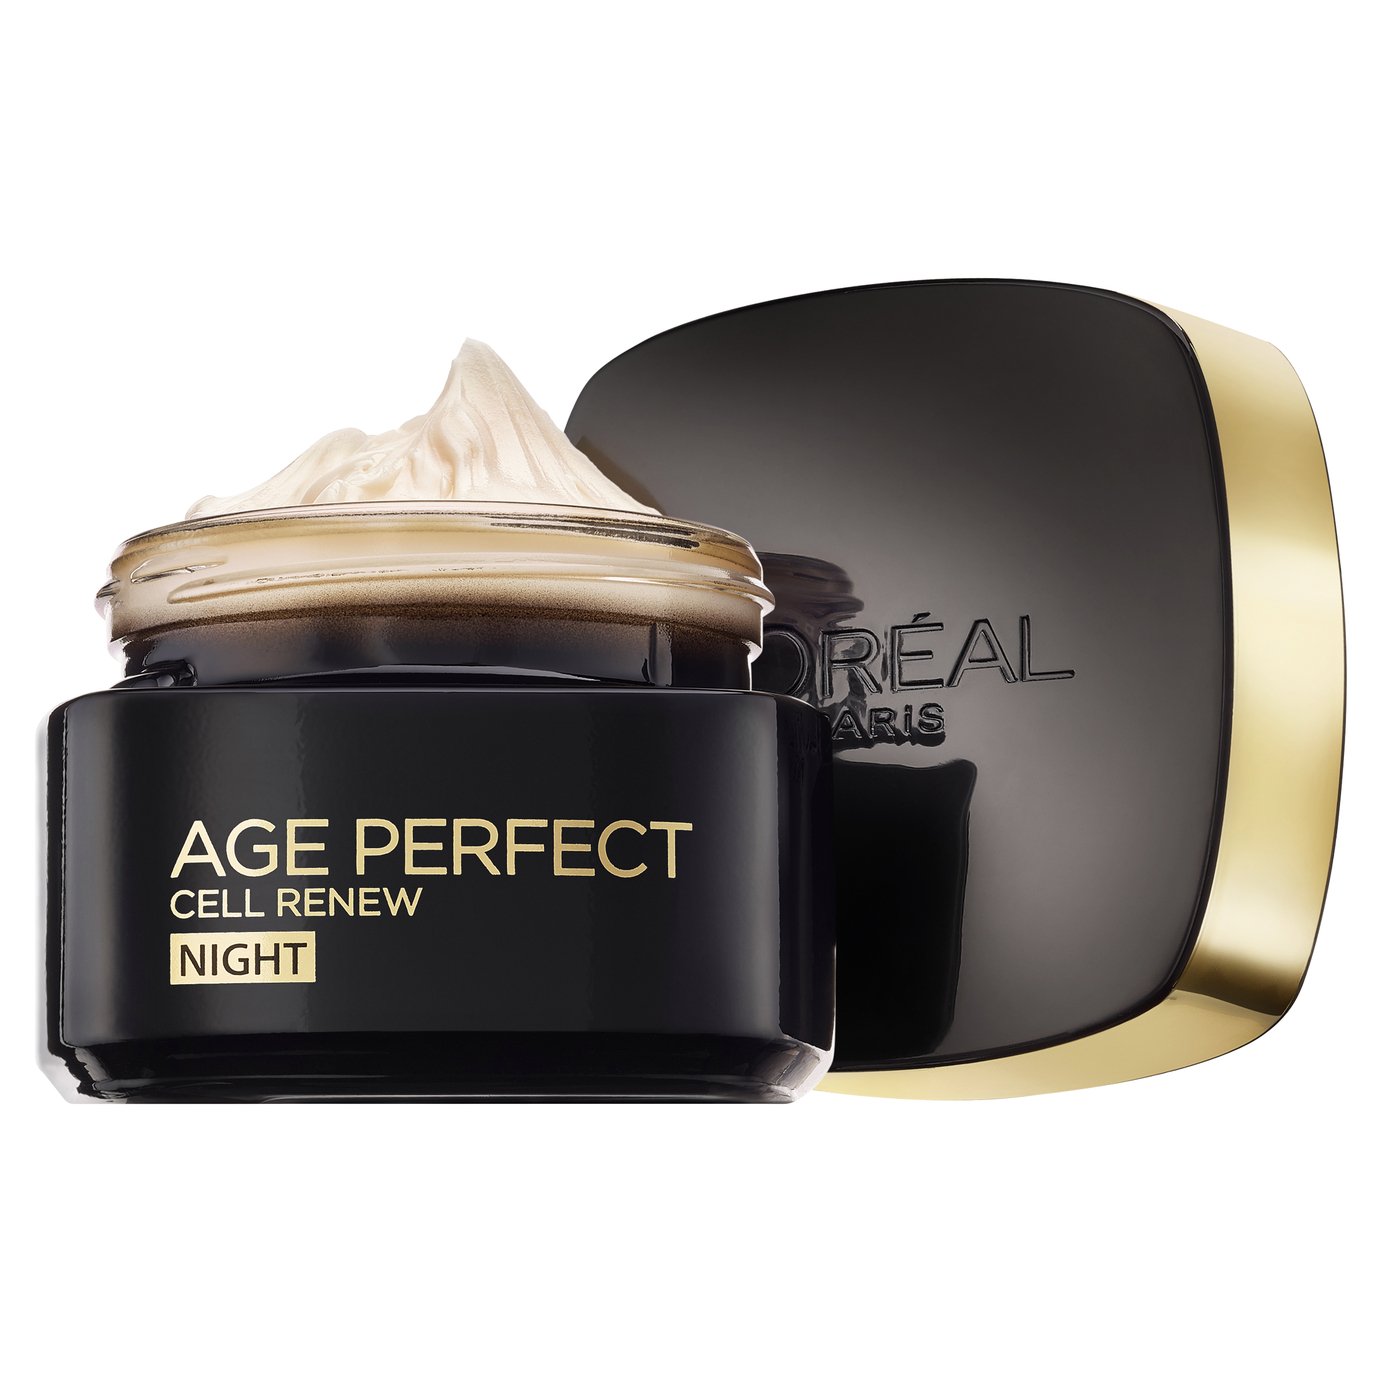 L'Oreal Paris Skin Age Perfect Cell Renew Night Cream Review